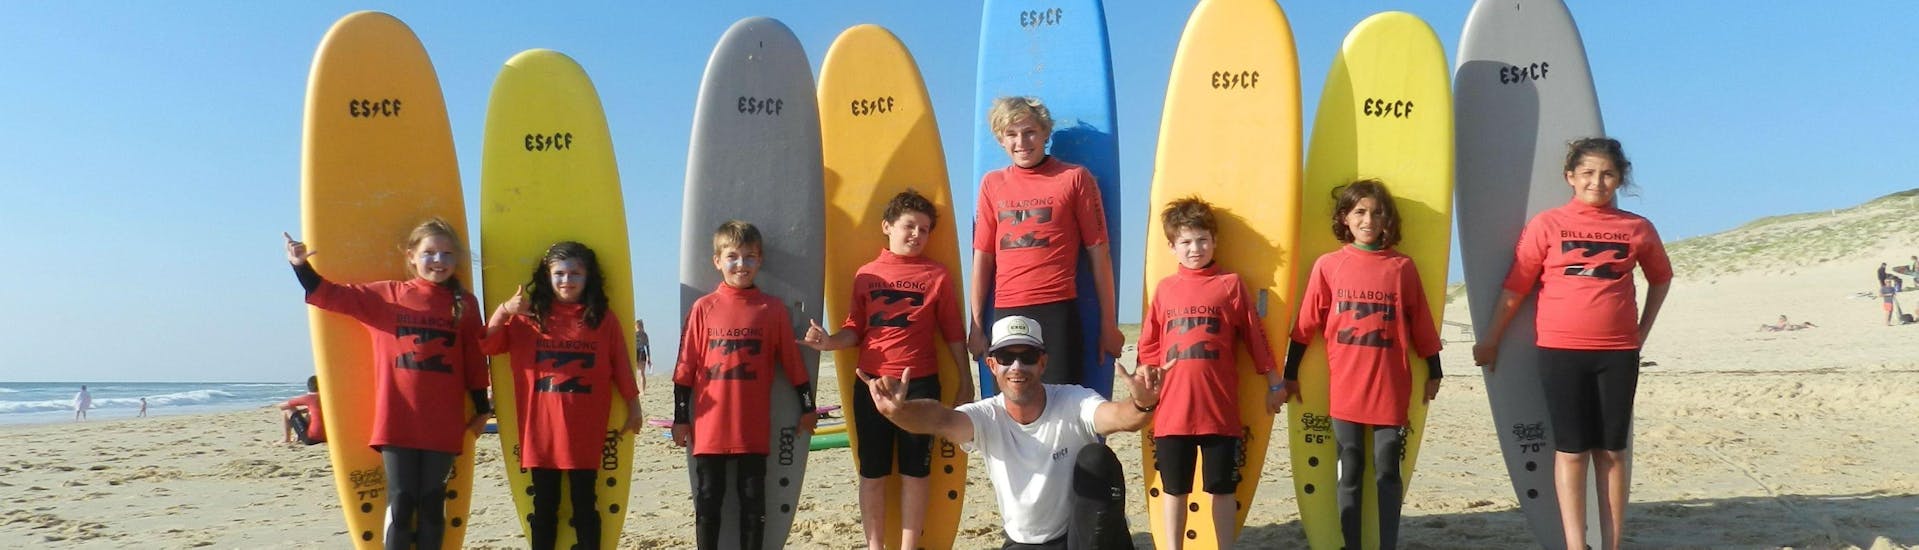 Children are standing next to each other in front of their surboard, their surf instructor from ESCF Vieux Boucau sitting on the sand, at the end of their Surfing Lessons on the Sablères Beach.